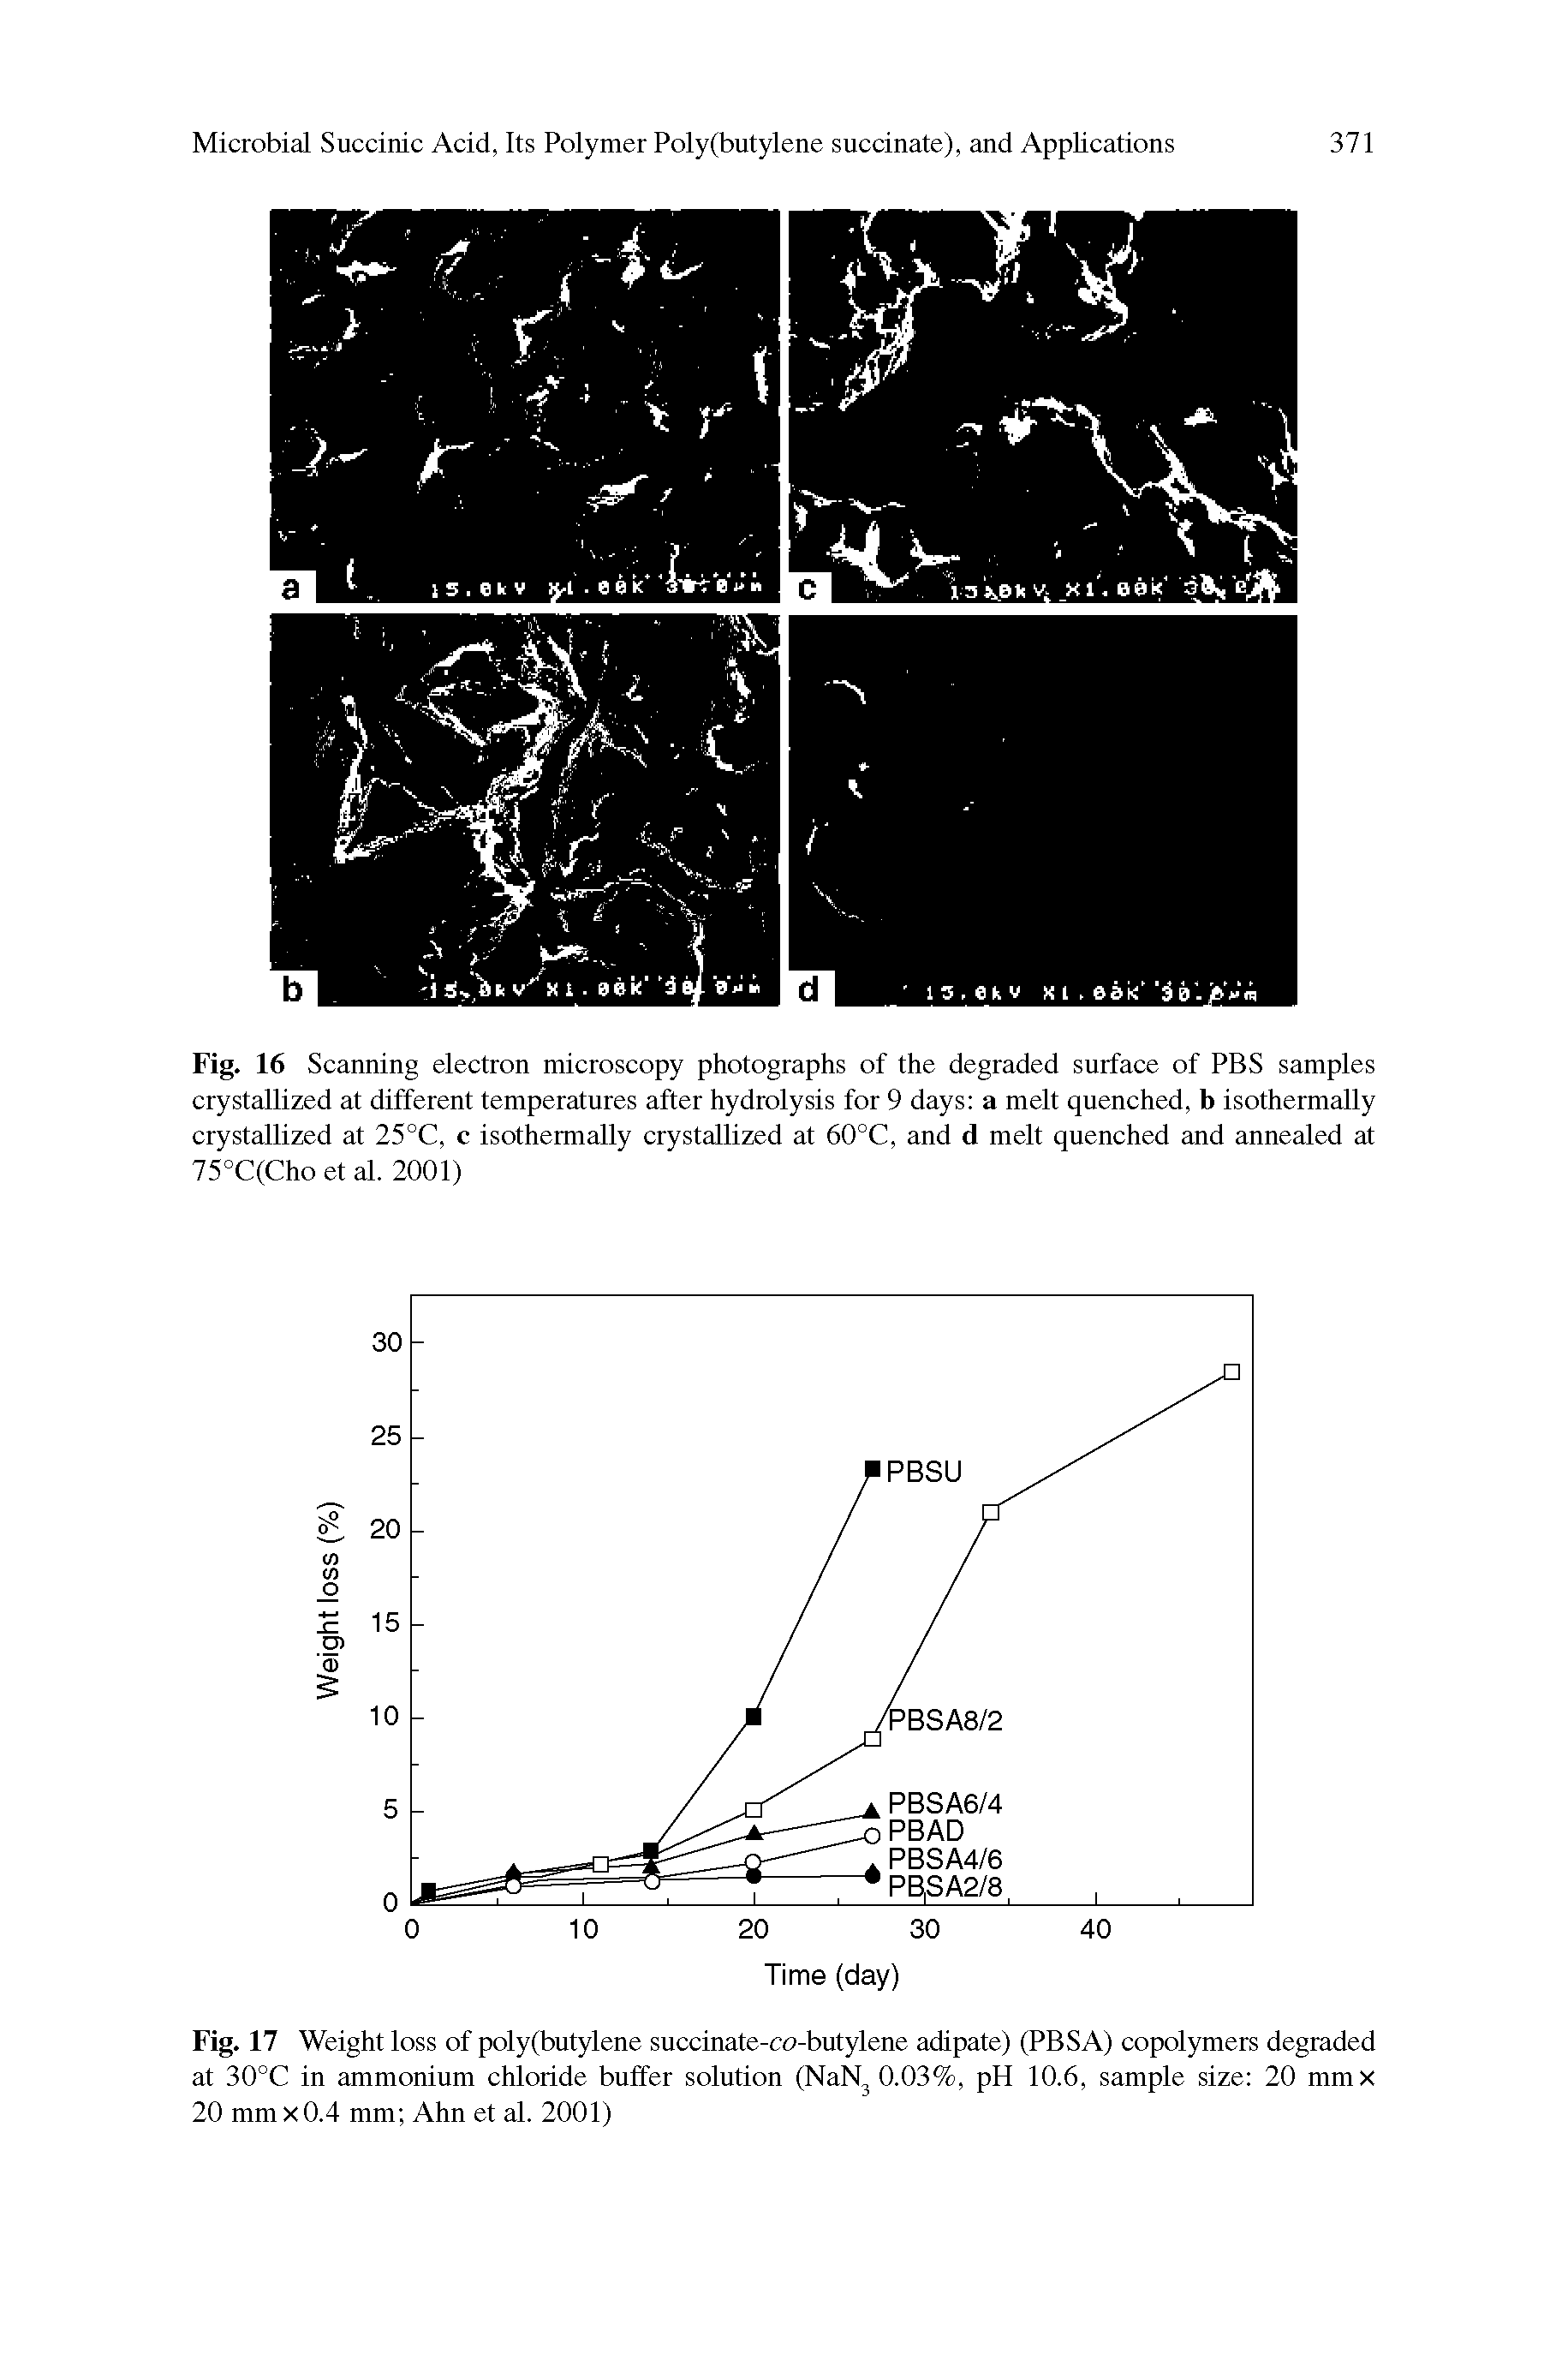 Fig. 17 Weight loss of poly(butylene succinate-co-butylene adipate) (PBSA) copolymers degraded at 30°C in ammonium chloride buffer solution (NaN 0.03%, pH 10.6, sample size 20 mmx 20 mmx0.4 mm Ahn et al. 2001)...